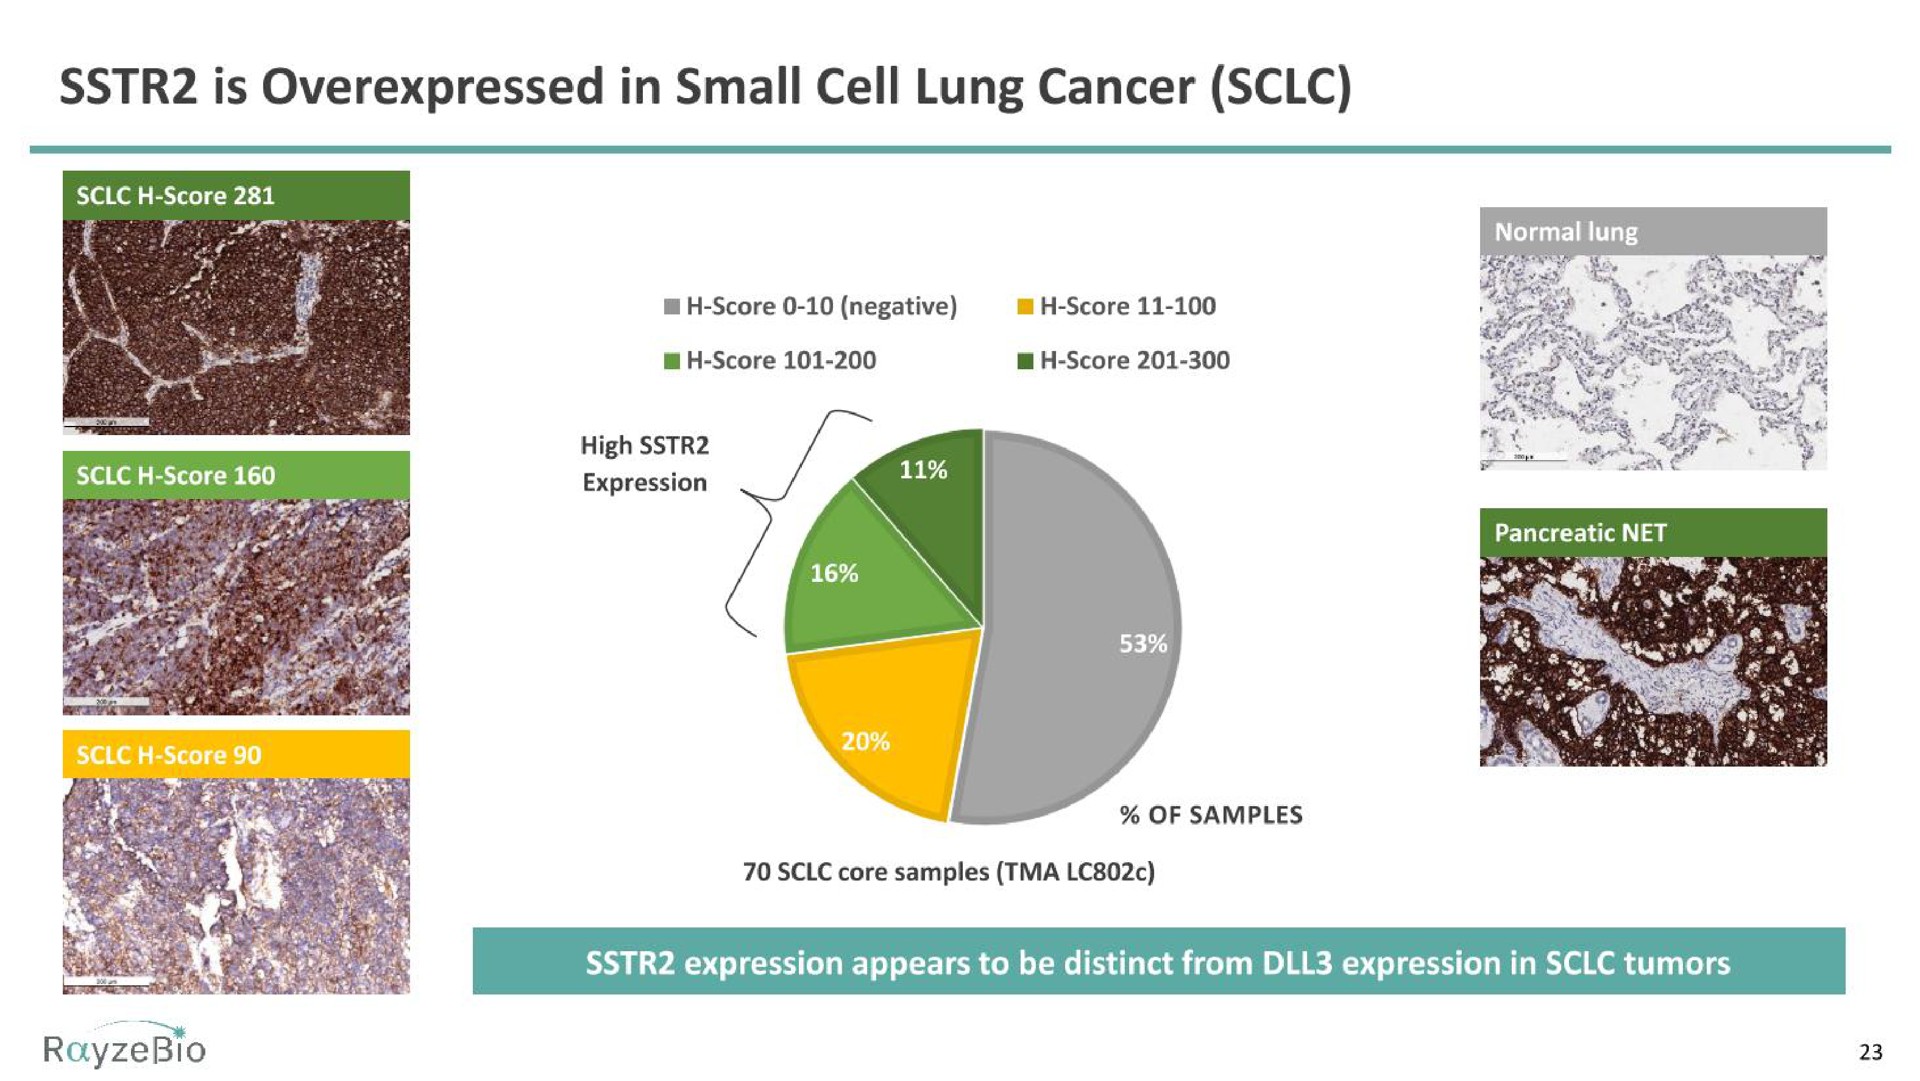 is in small cell lung cancer | RayzeBio